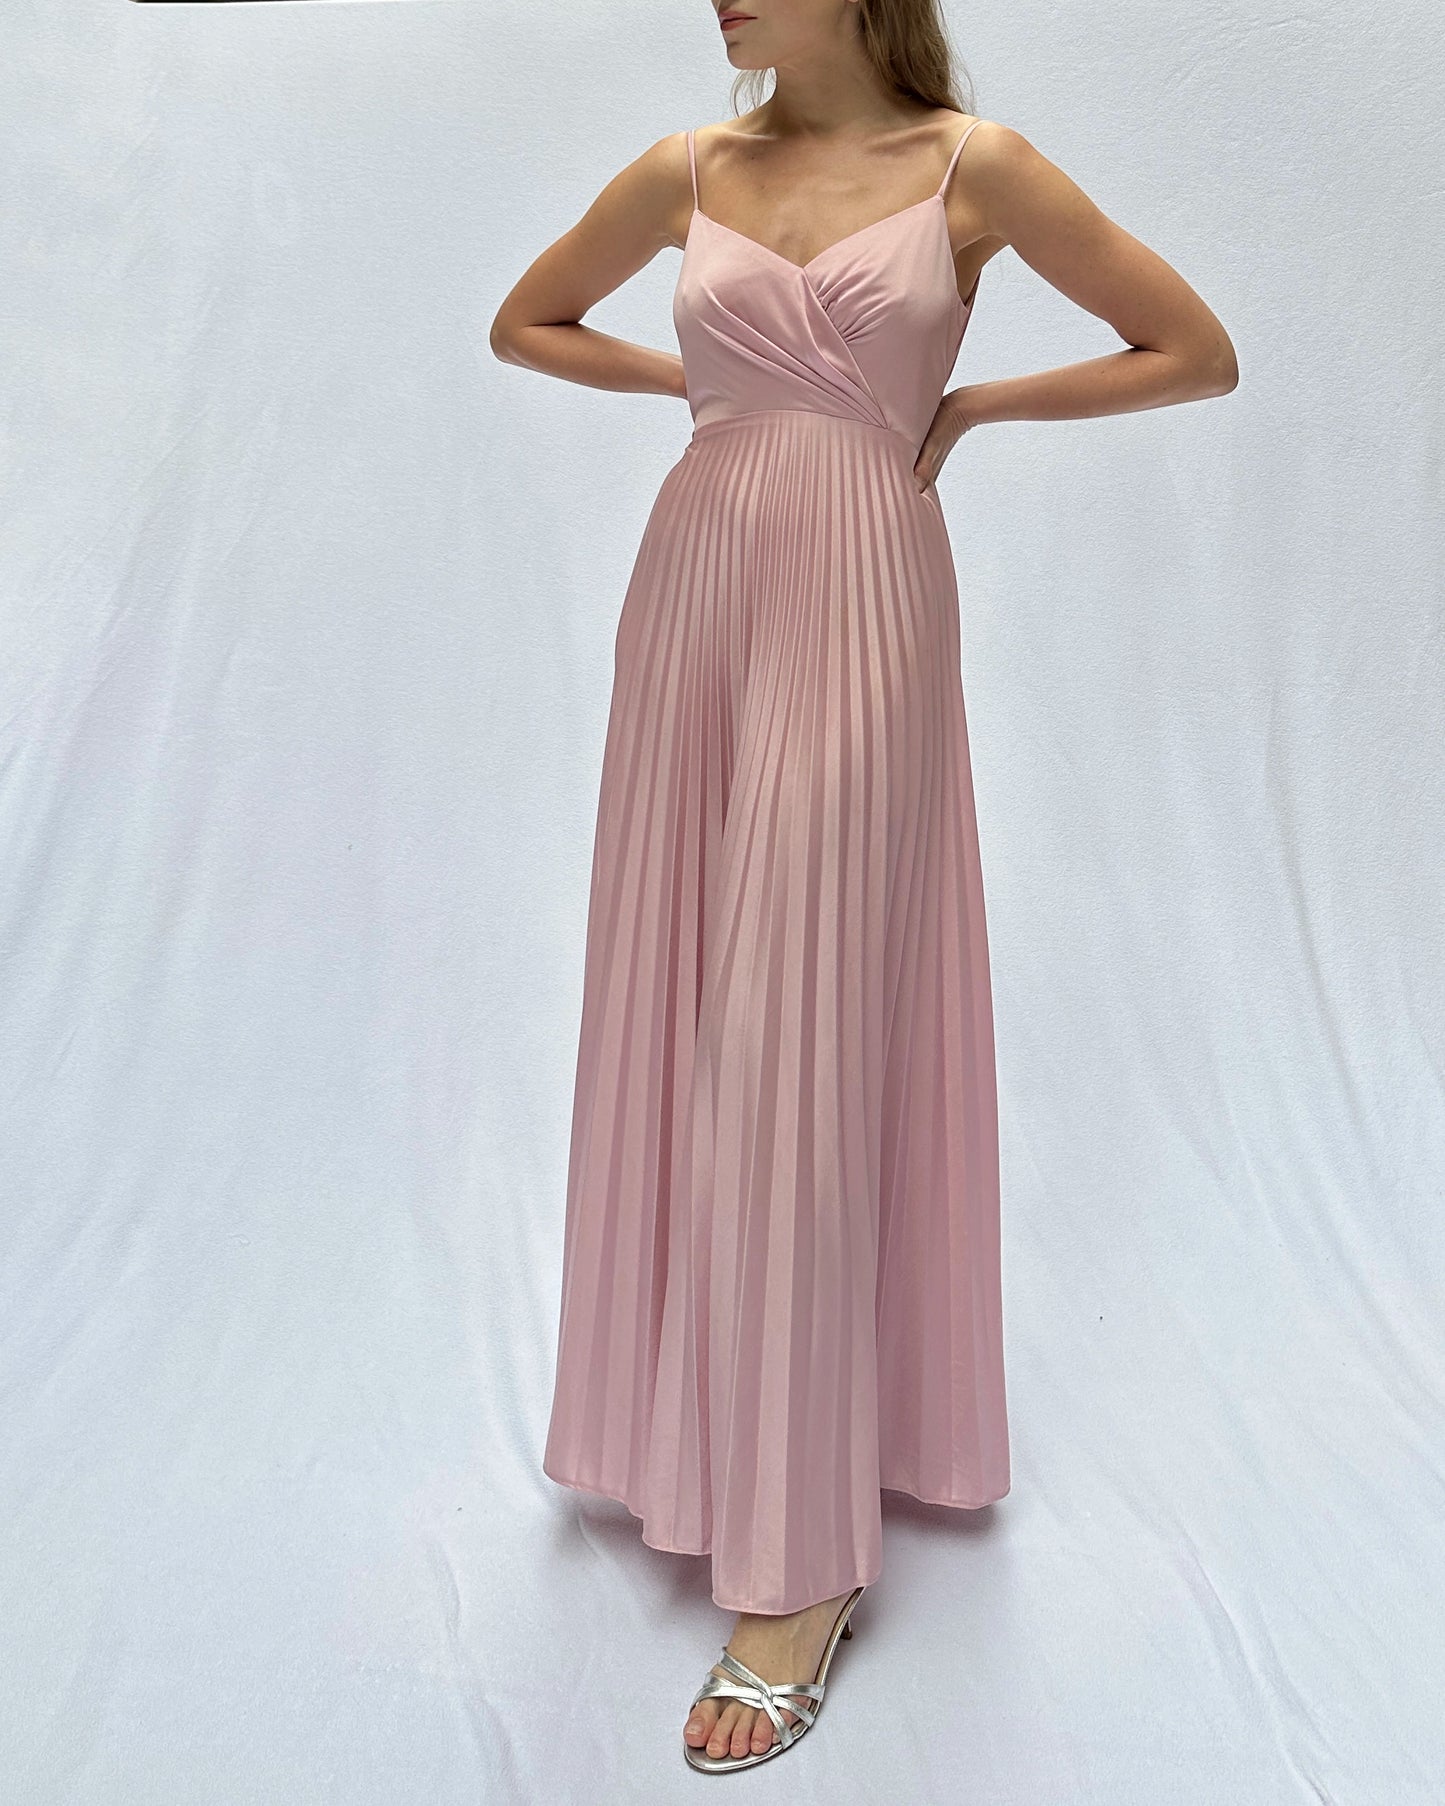 VINTAGE 1970s ACCORDION-PLEATED JERSEY GOWN